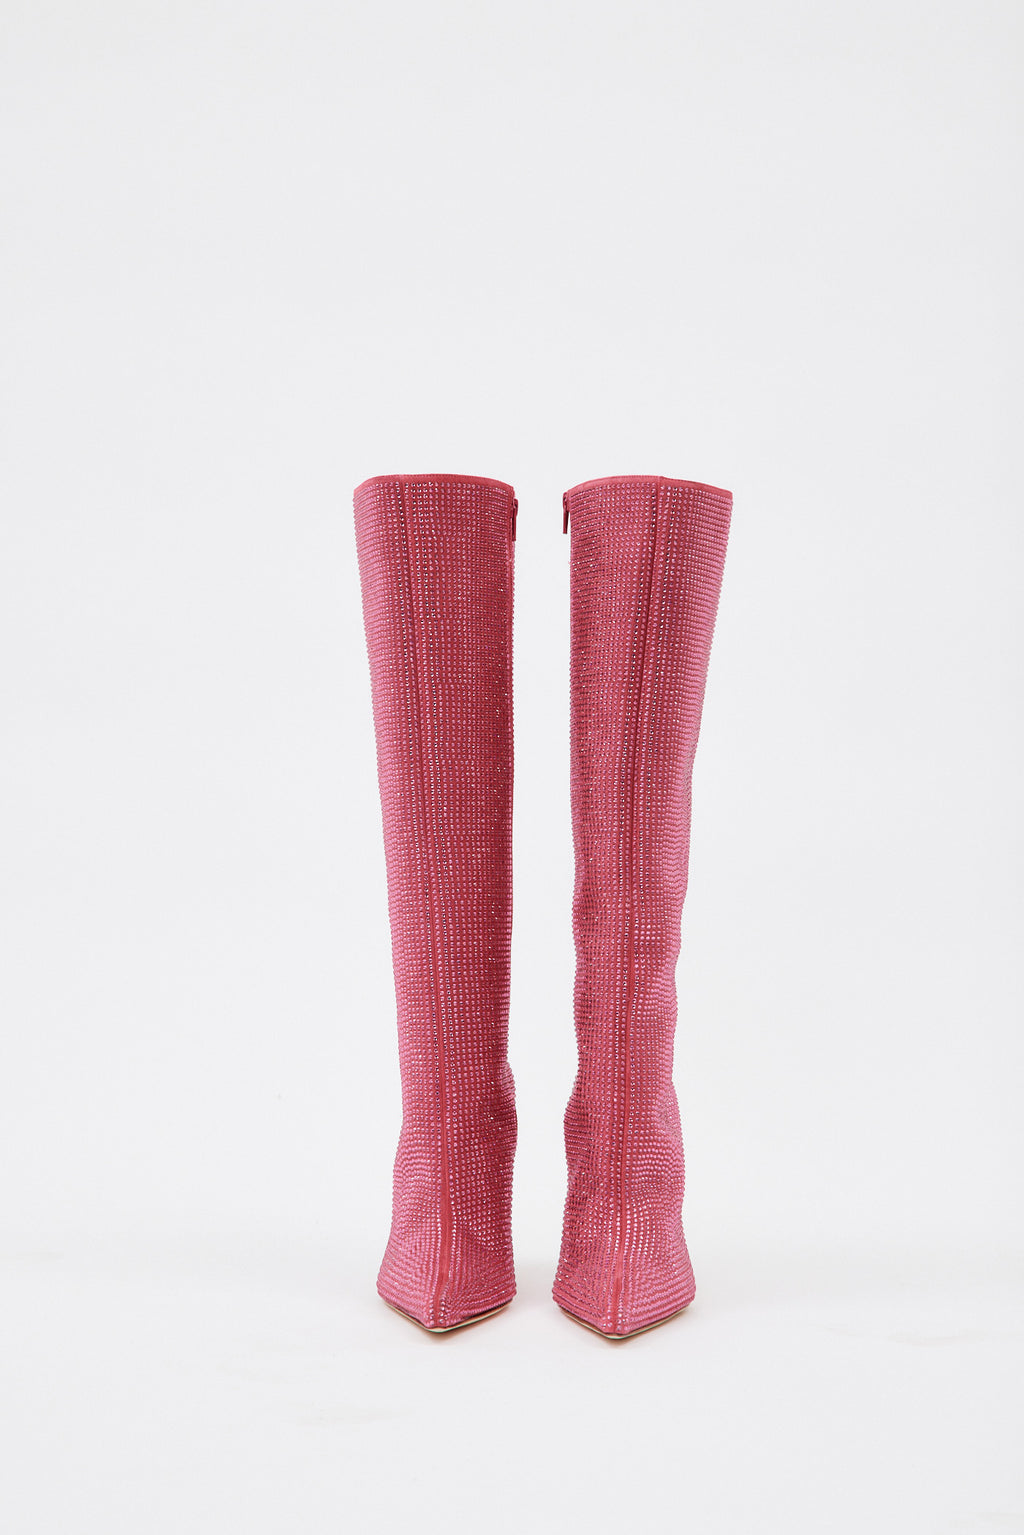 Tall Pointed Toe Pink Diamante Crystal Boots